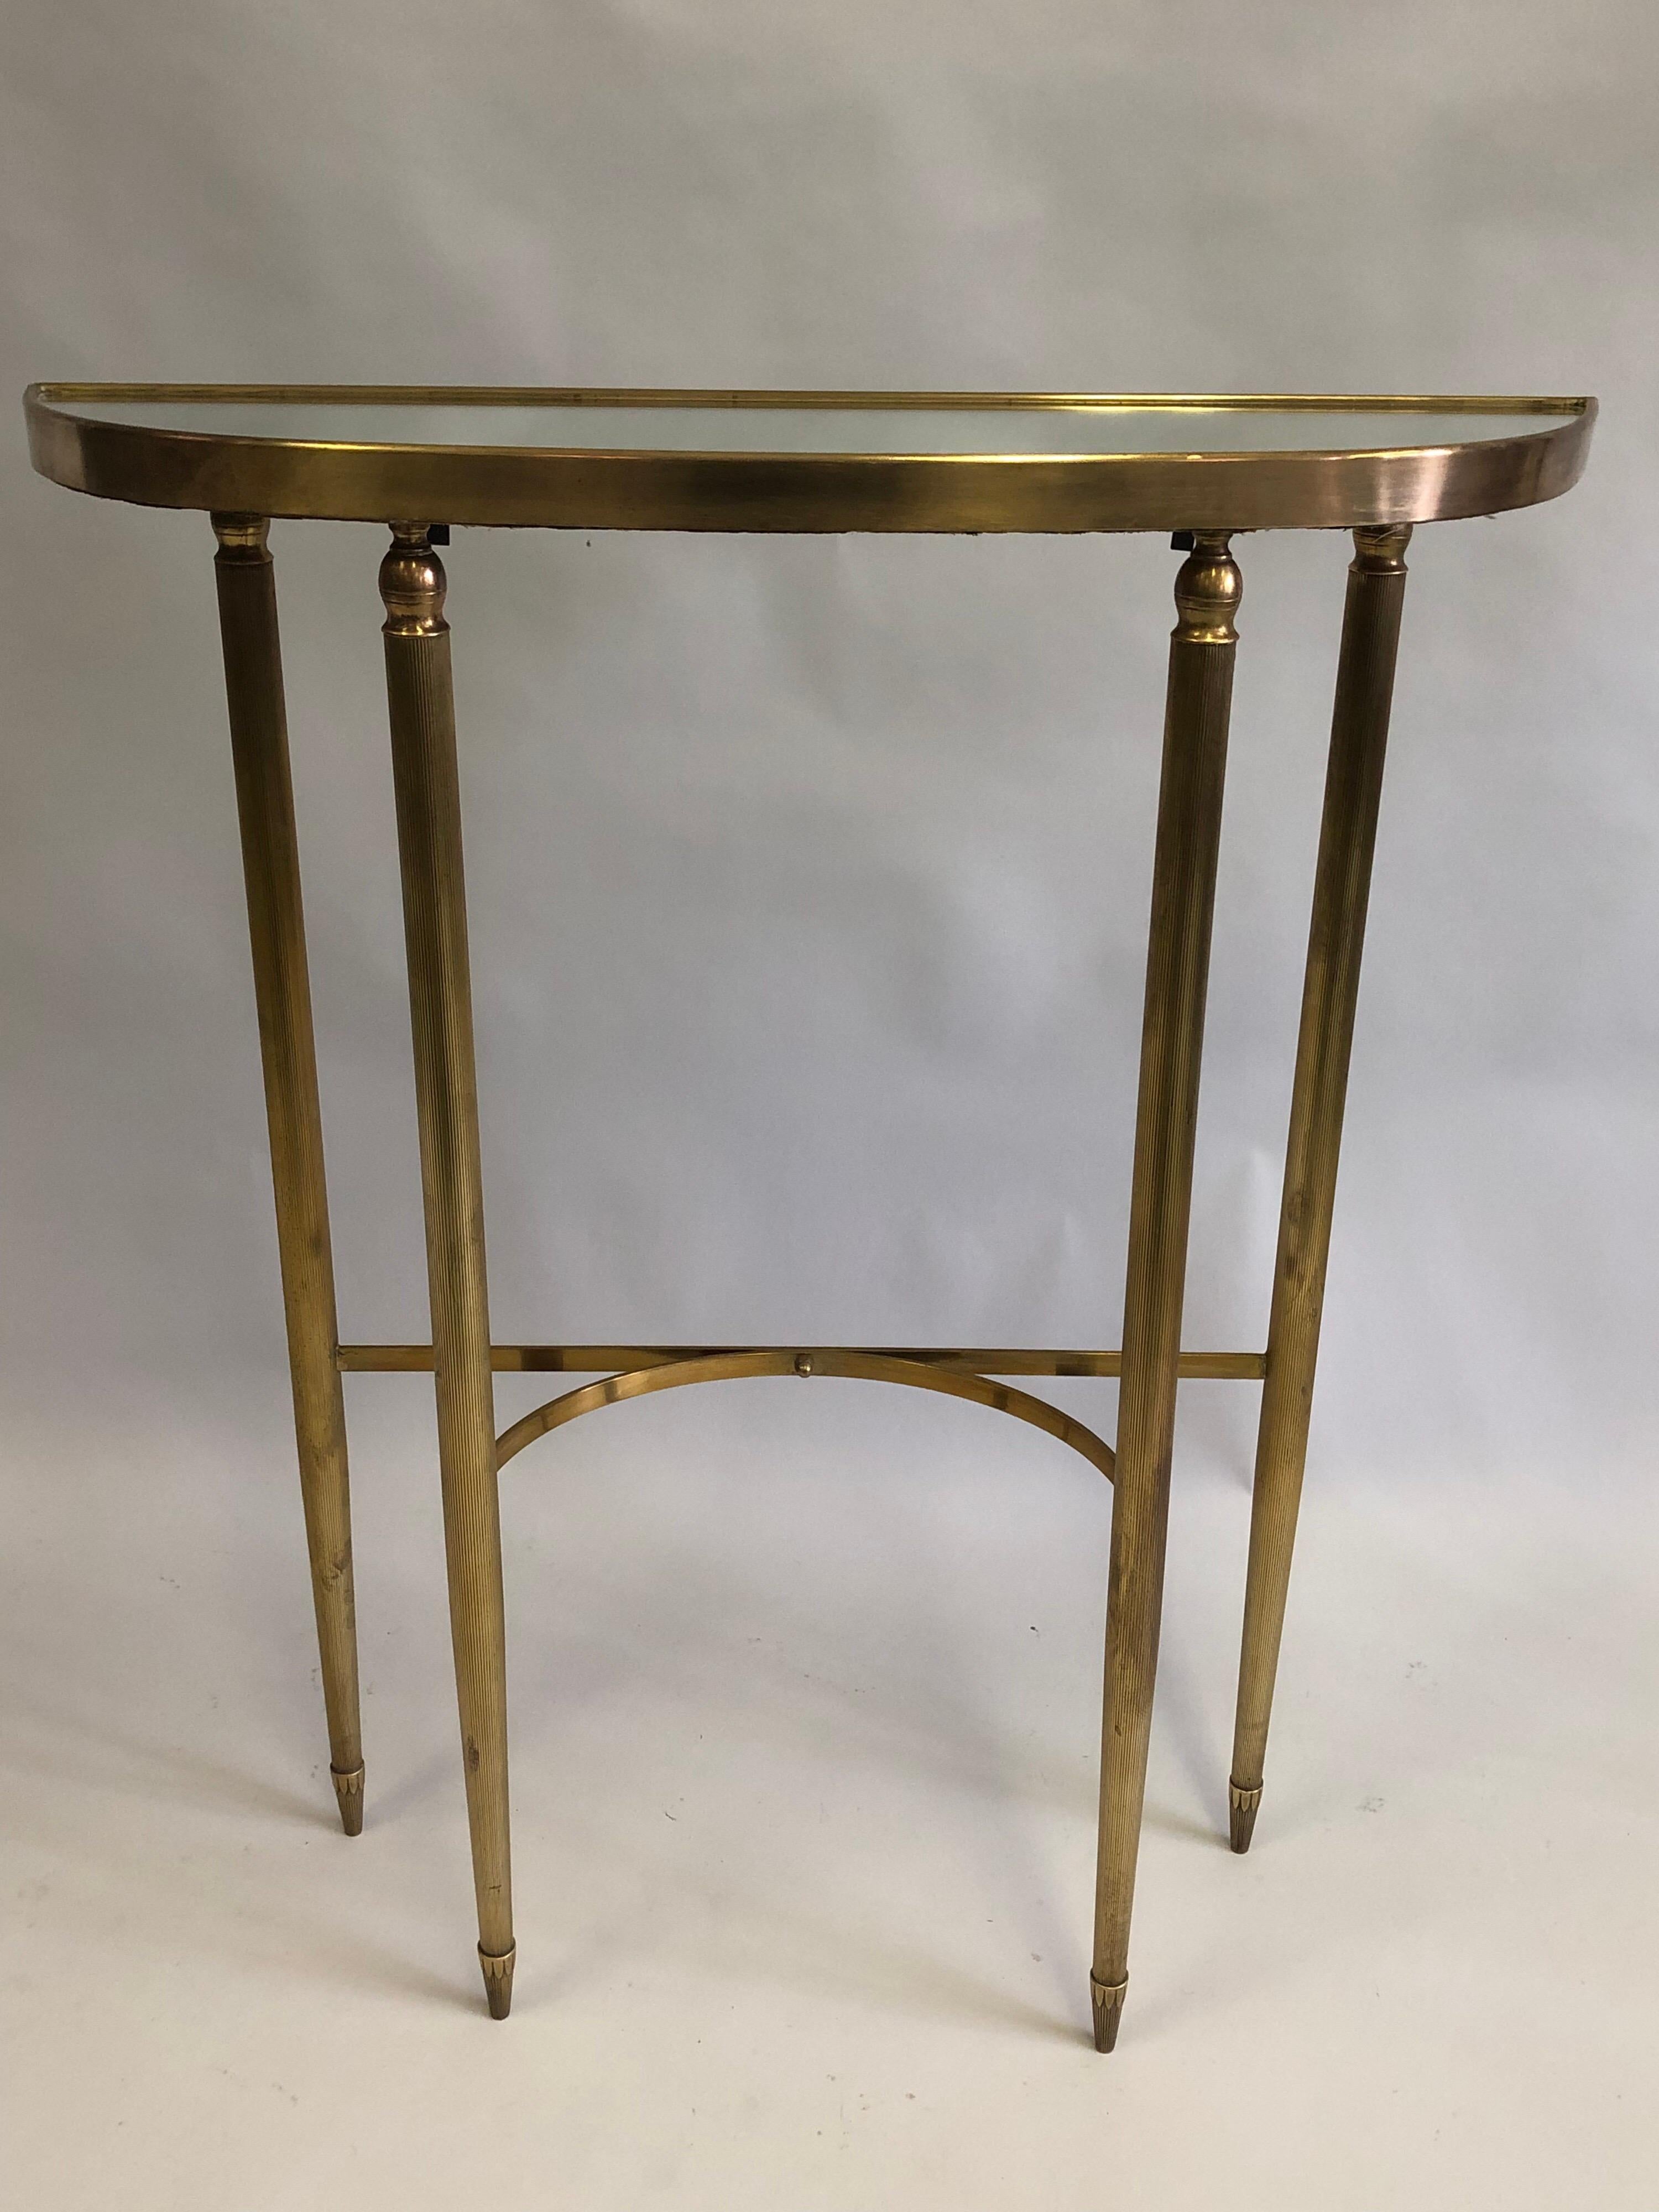 Neoclassical Revival Italian Mid-Century Modern Neoclassical Brass Console by Guglielmo Ulrich, 1948